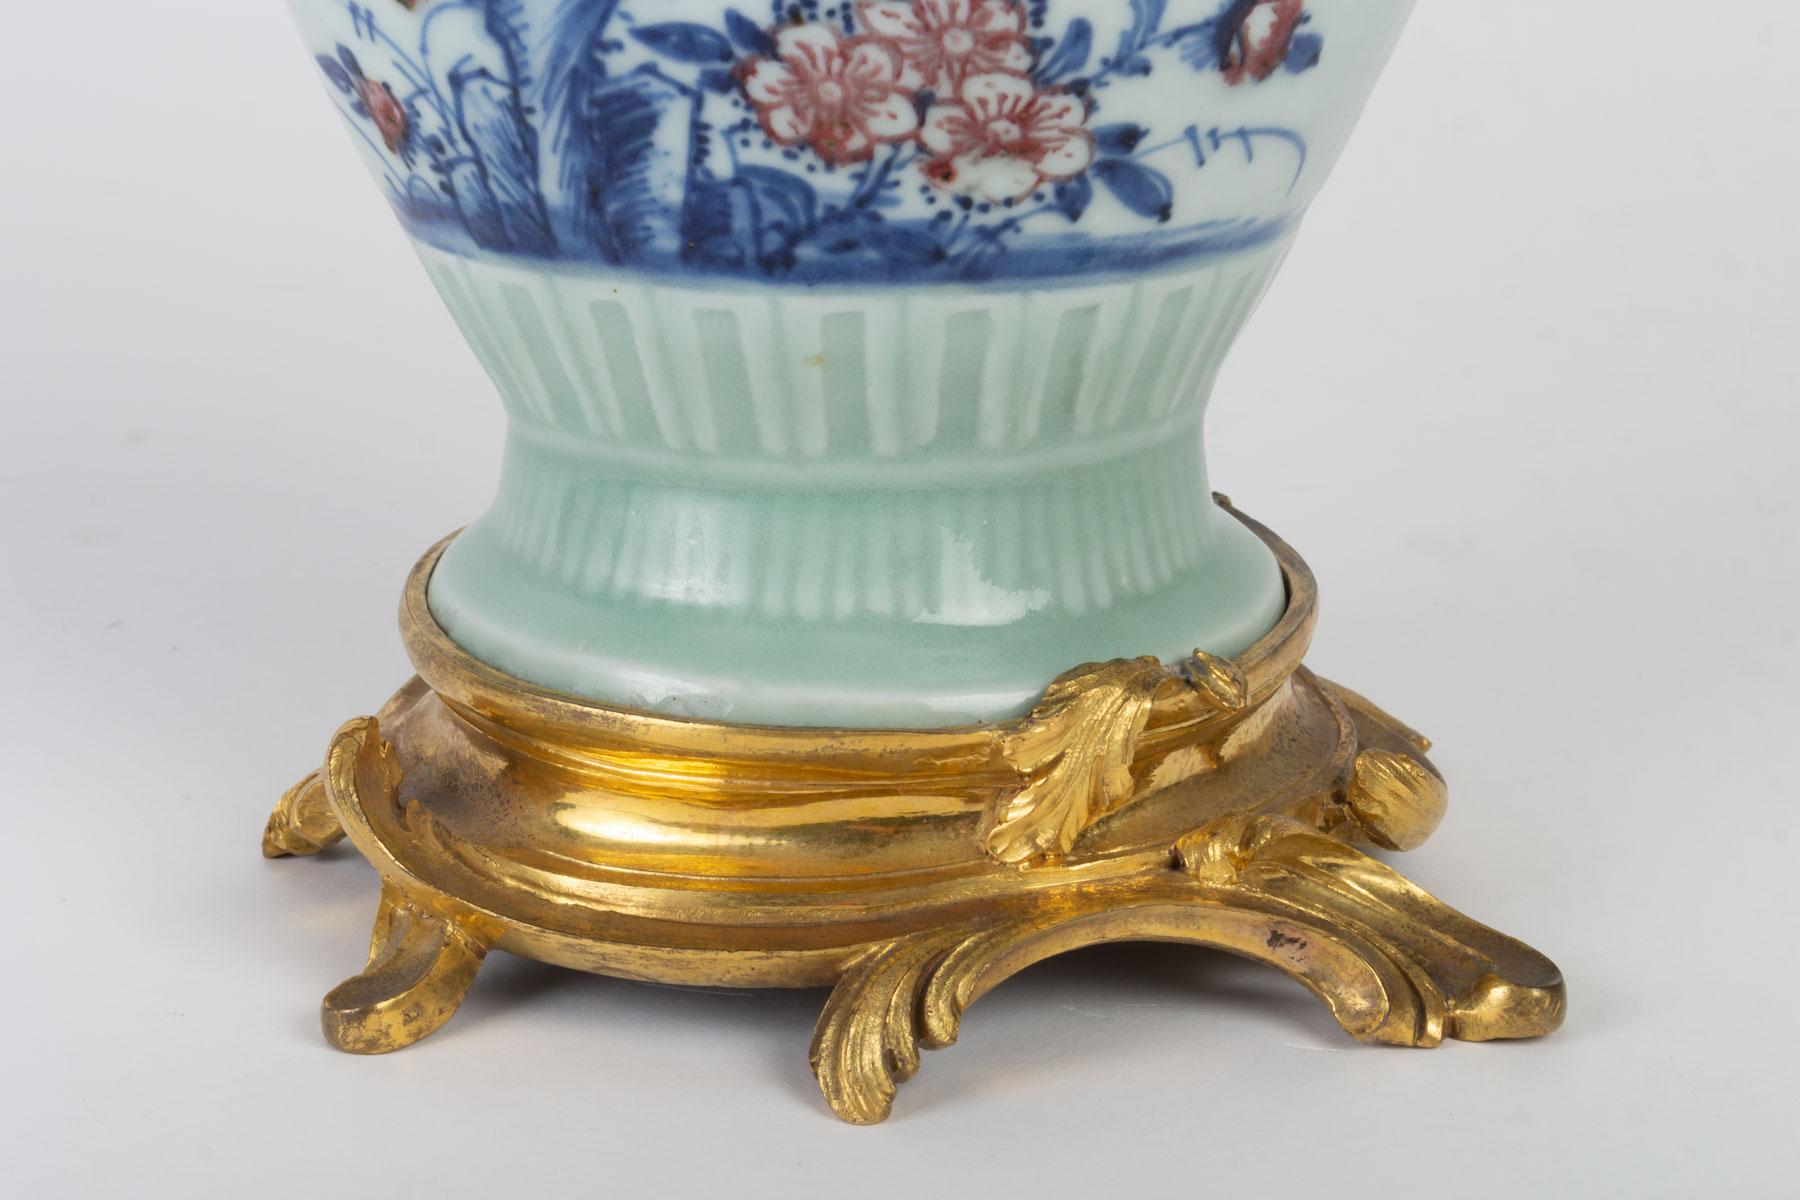 Chinese Mounted Porcelain Vase, Gilt Bronze and Chiselled, 18th Century